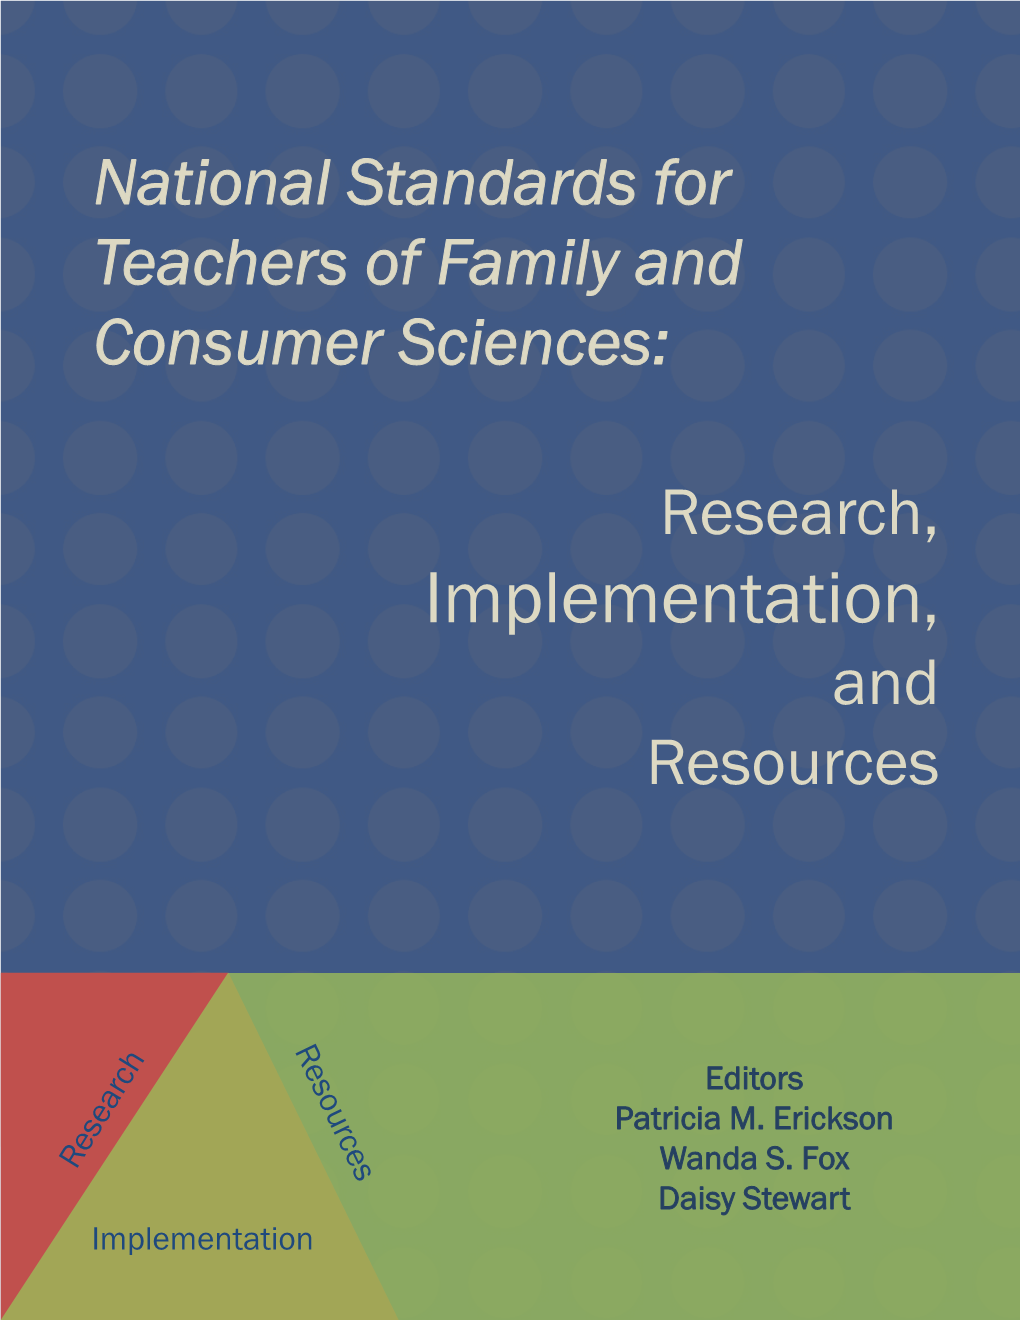 National Standards for Teachers of Family and Consumer Sciences